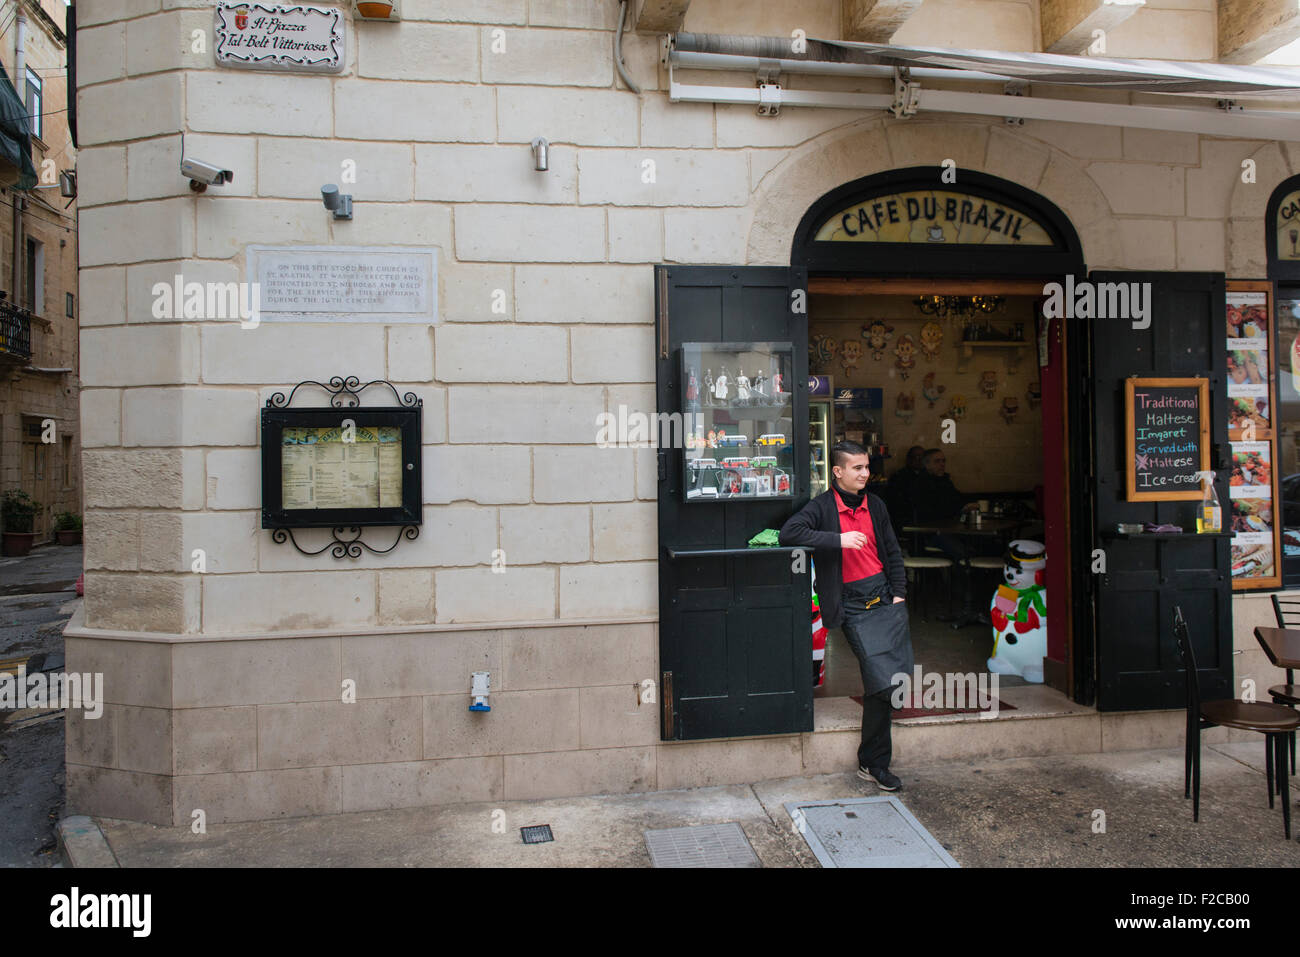 Malta, 1 January 2015 In the renovated streets of Birgu, part of the three cities and the first captal of Malta before valletta. Stock Photo